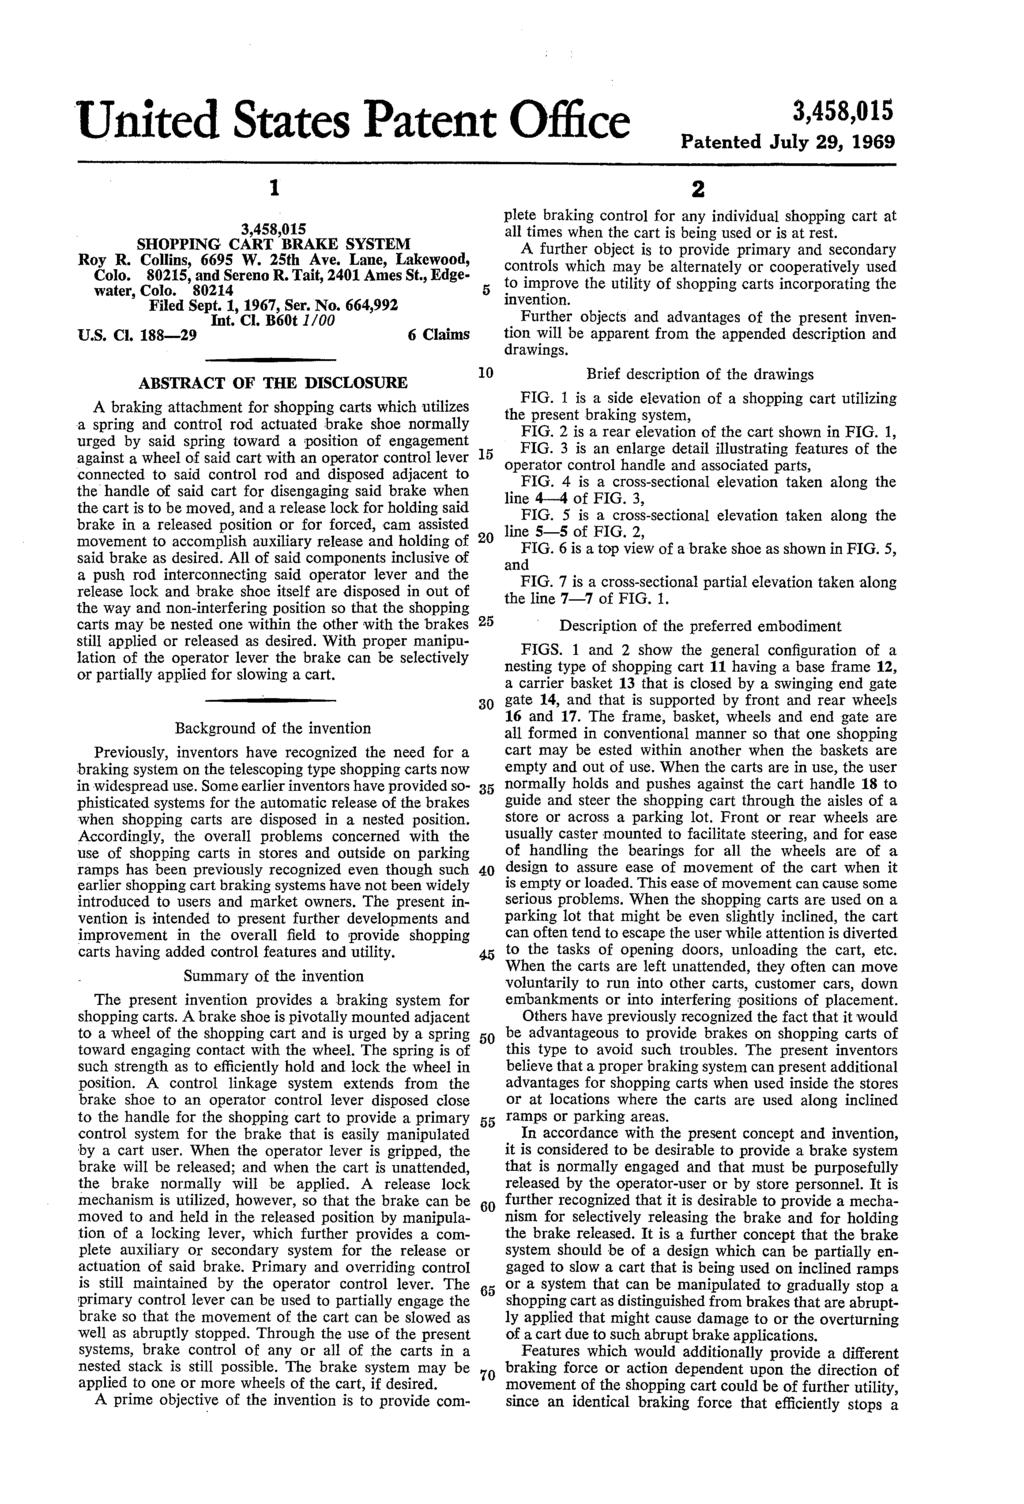 United States Patent ffice Patented July 29, 1969 Roy R. Collins, 6695 W. 25th Ave. Lane, Lakewood, Colo. 80215, and Sereno R. Tait, 21 Ames St., Edge water, Colo. 8024 Filed Sept. 1, 1967, Ser. No.